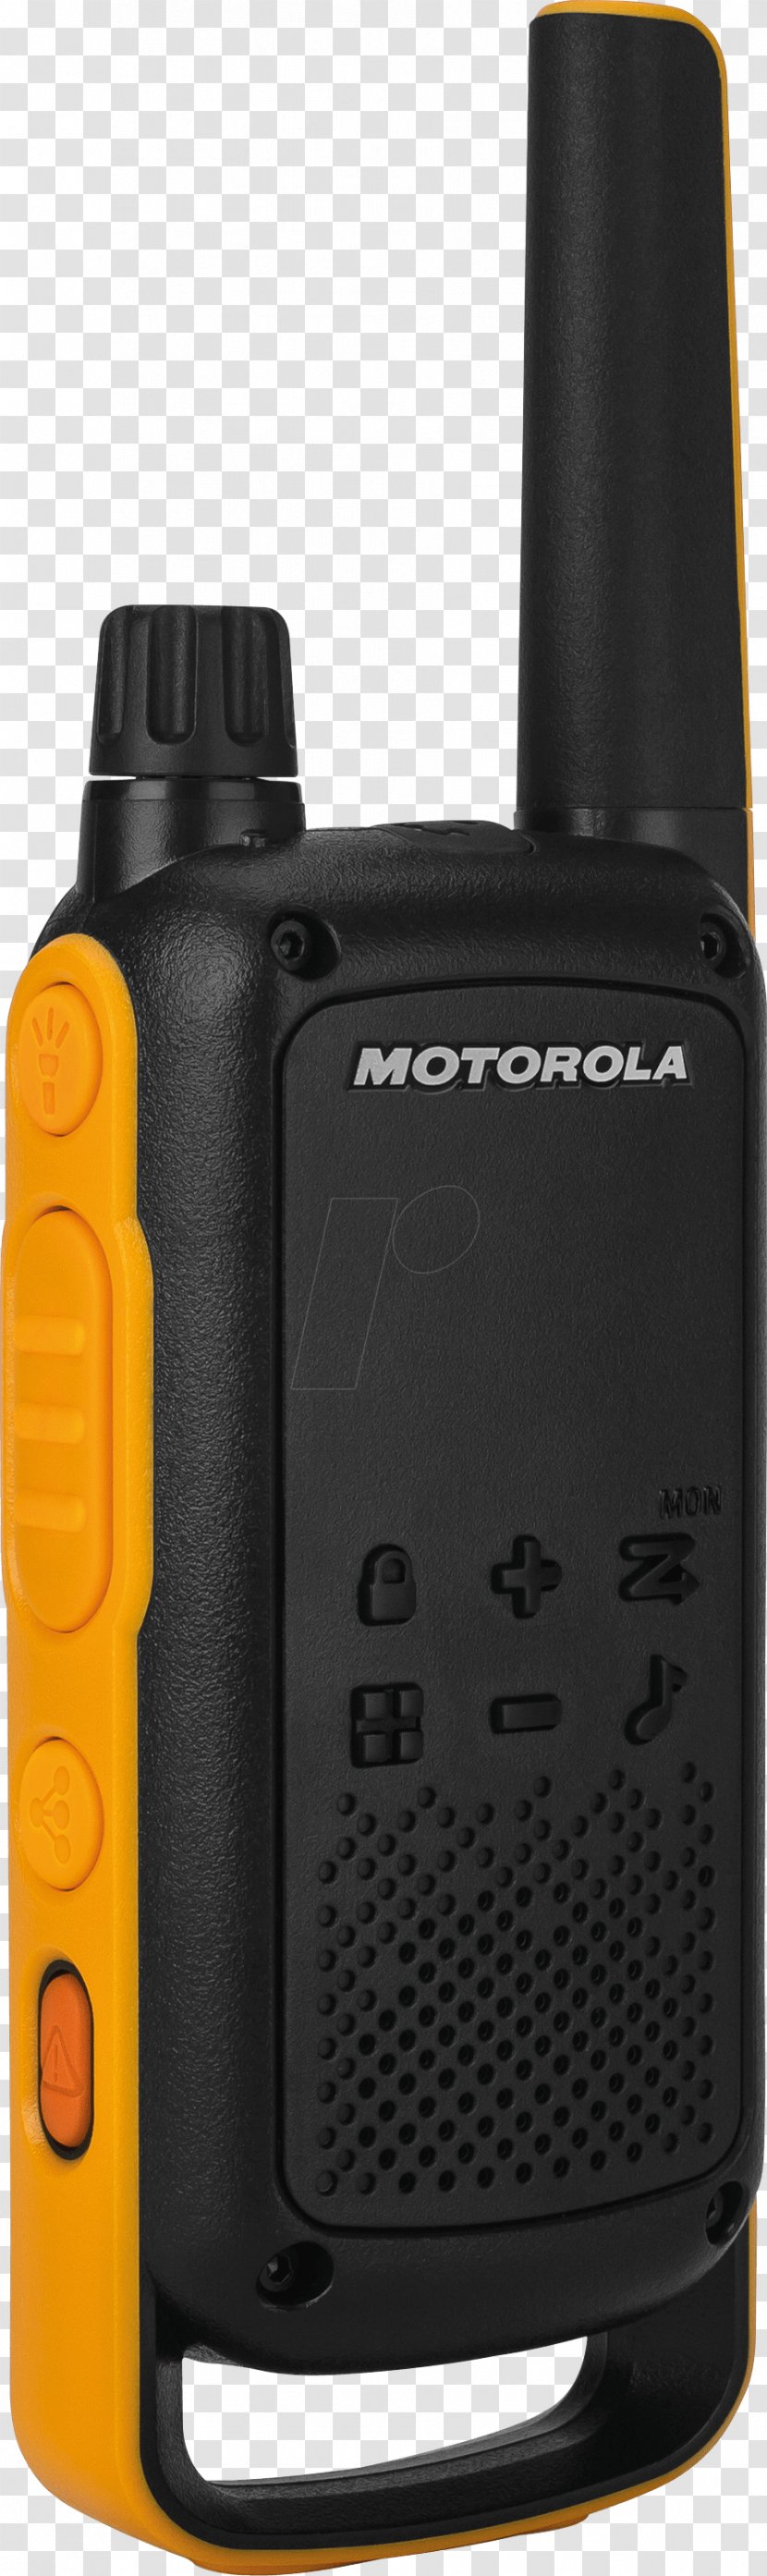 Motorola Talkabout T82 Extreme 188069 PMR446 Walkie-talkie Two-way Radio Professional Mobile - Portable Communications Device - Twoway Transparent PNG